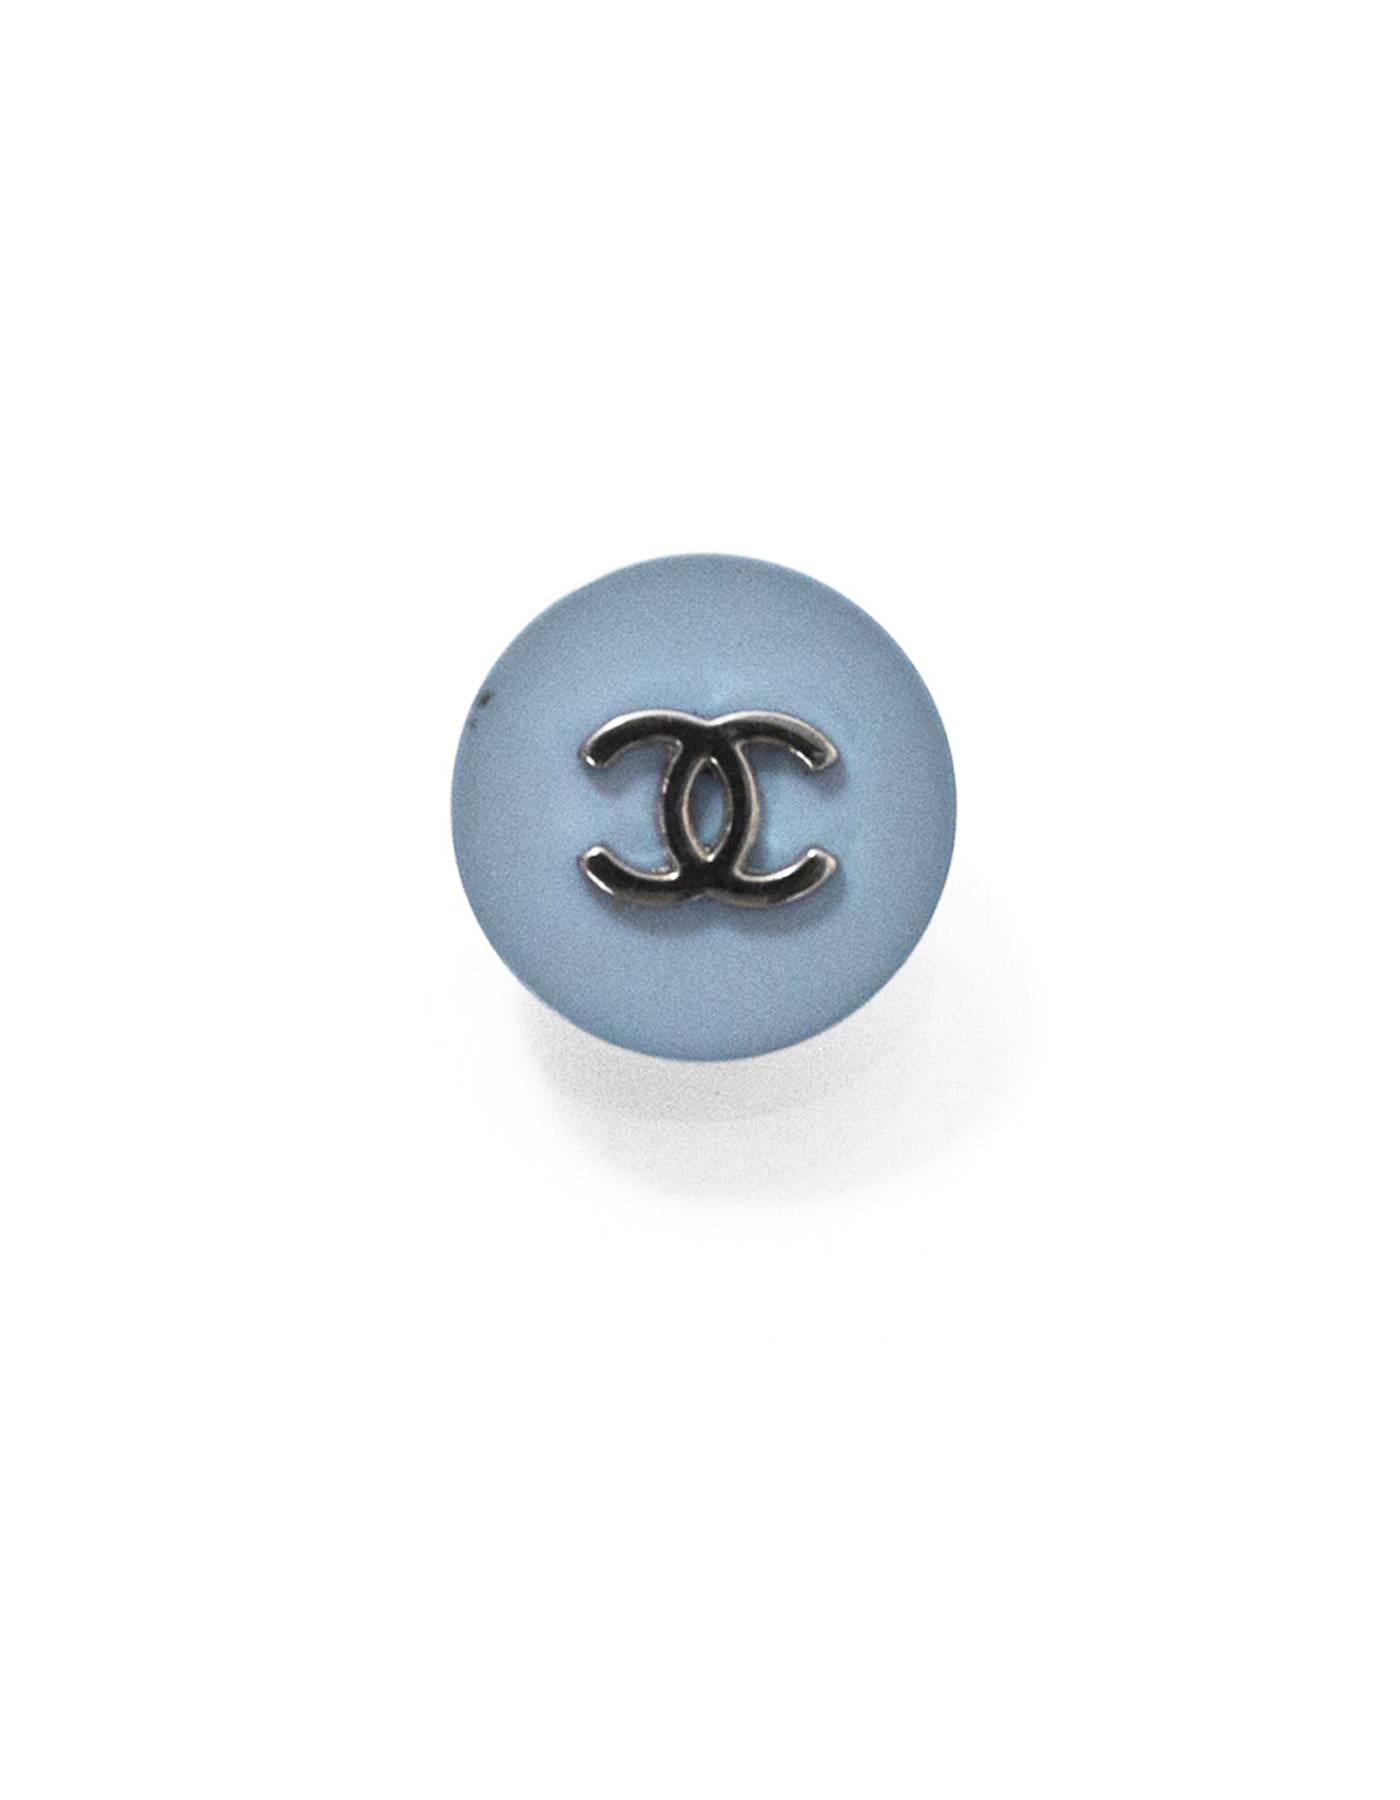 Chanel Blue & Silver CC Buttons
Features set of two 18mm buttons

Color: Blue, silver
Hardware: Silvertone
Materials: Resin, metal
Stamp: Chanel
Overall Condition: Excellent good pre-owned condition, light surface marks

Measurements: 
Diameter: 18mm